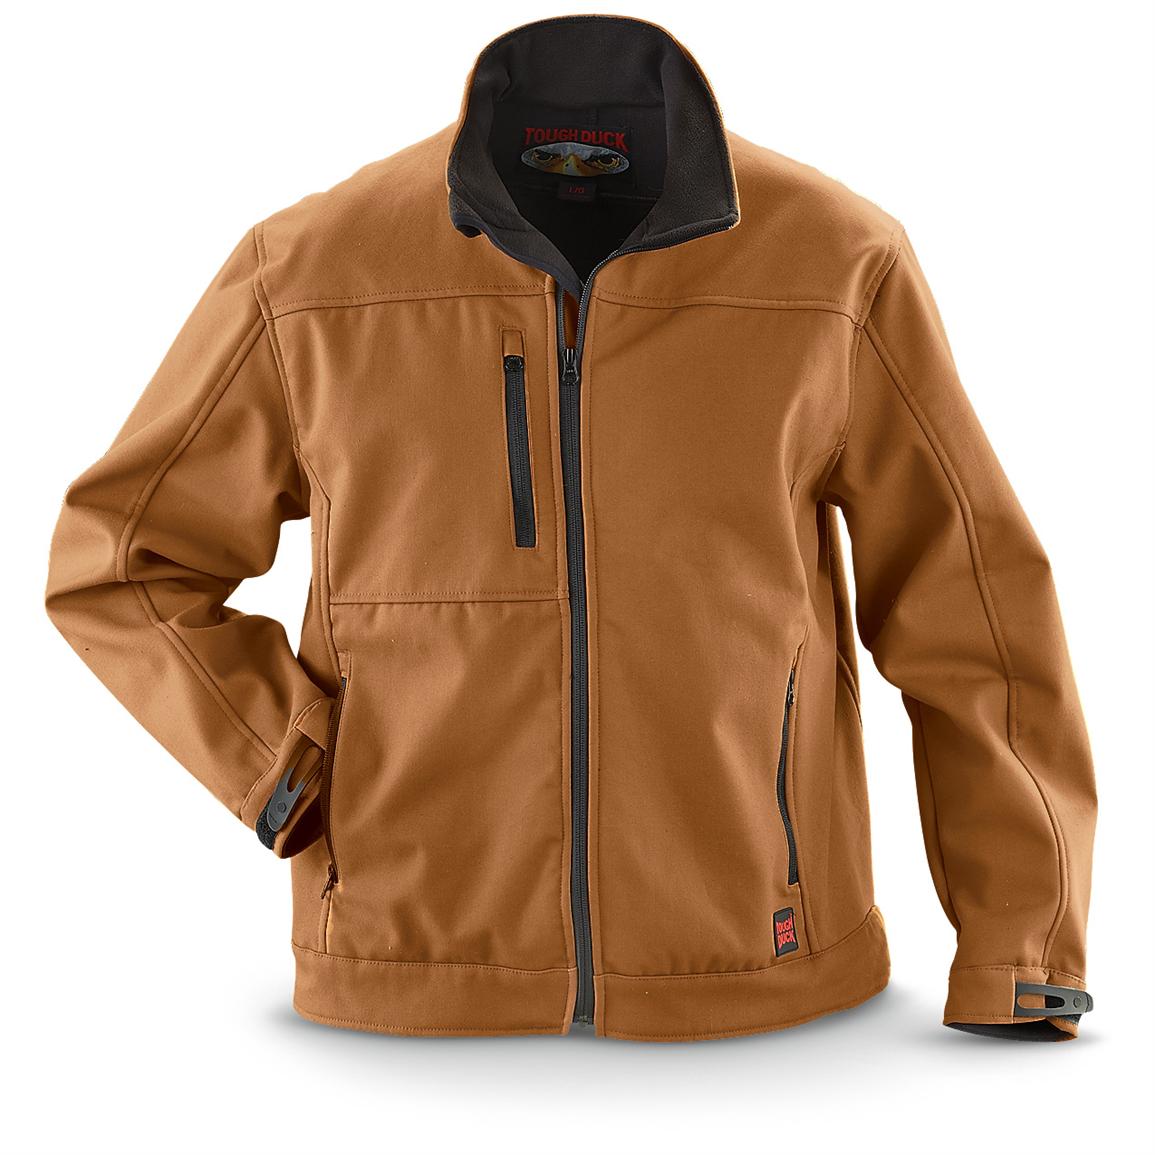 Richlu® Jacket - 210783, Insulated Jackets & Coats at Sportsman's Guide